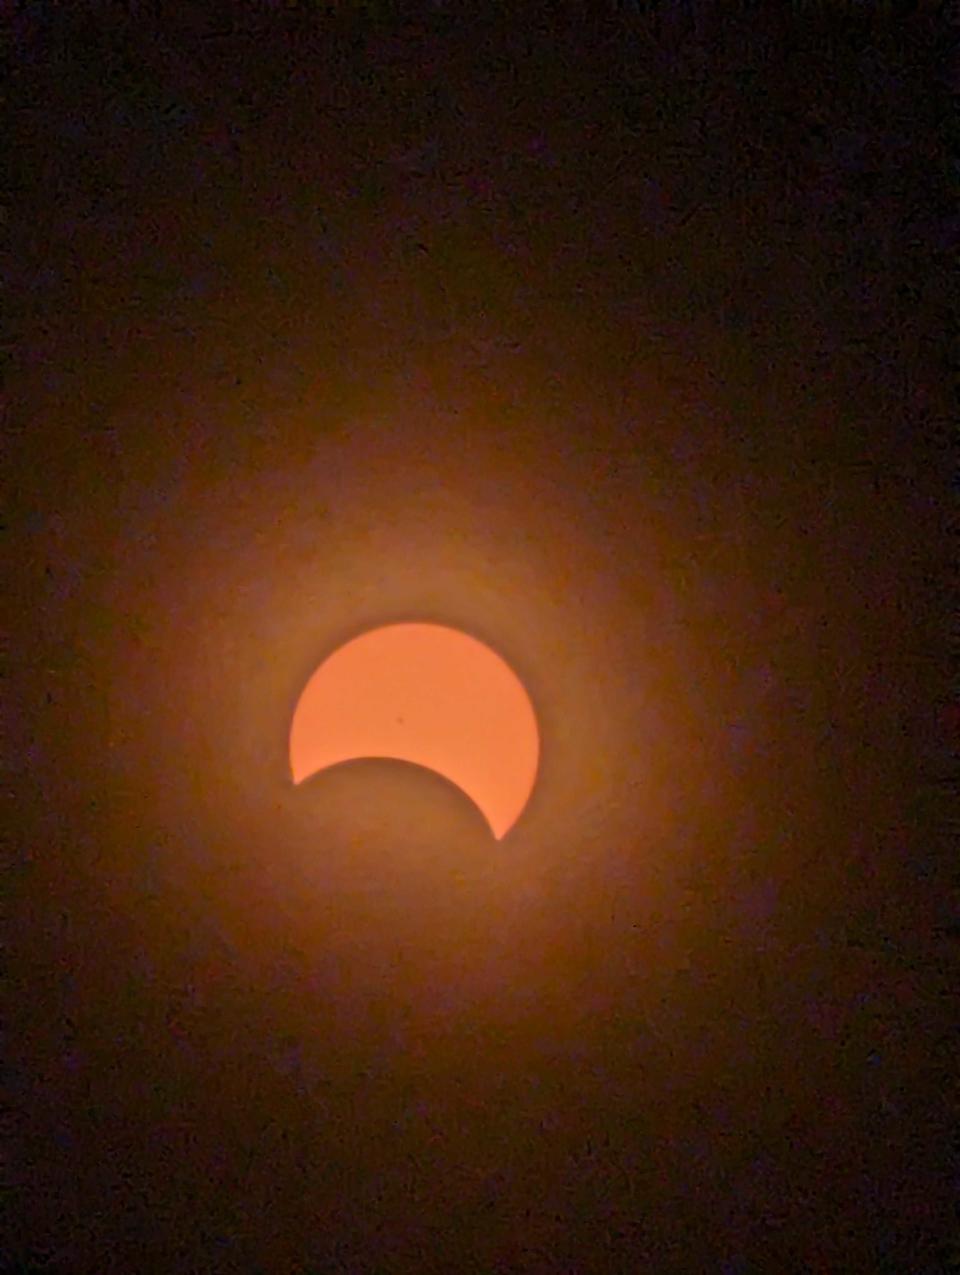 The April 8 eclipse taken from a Pixel 7 Pro